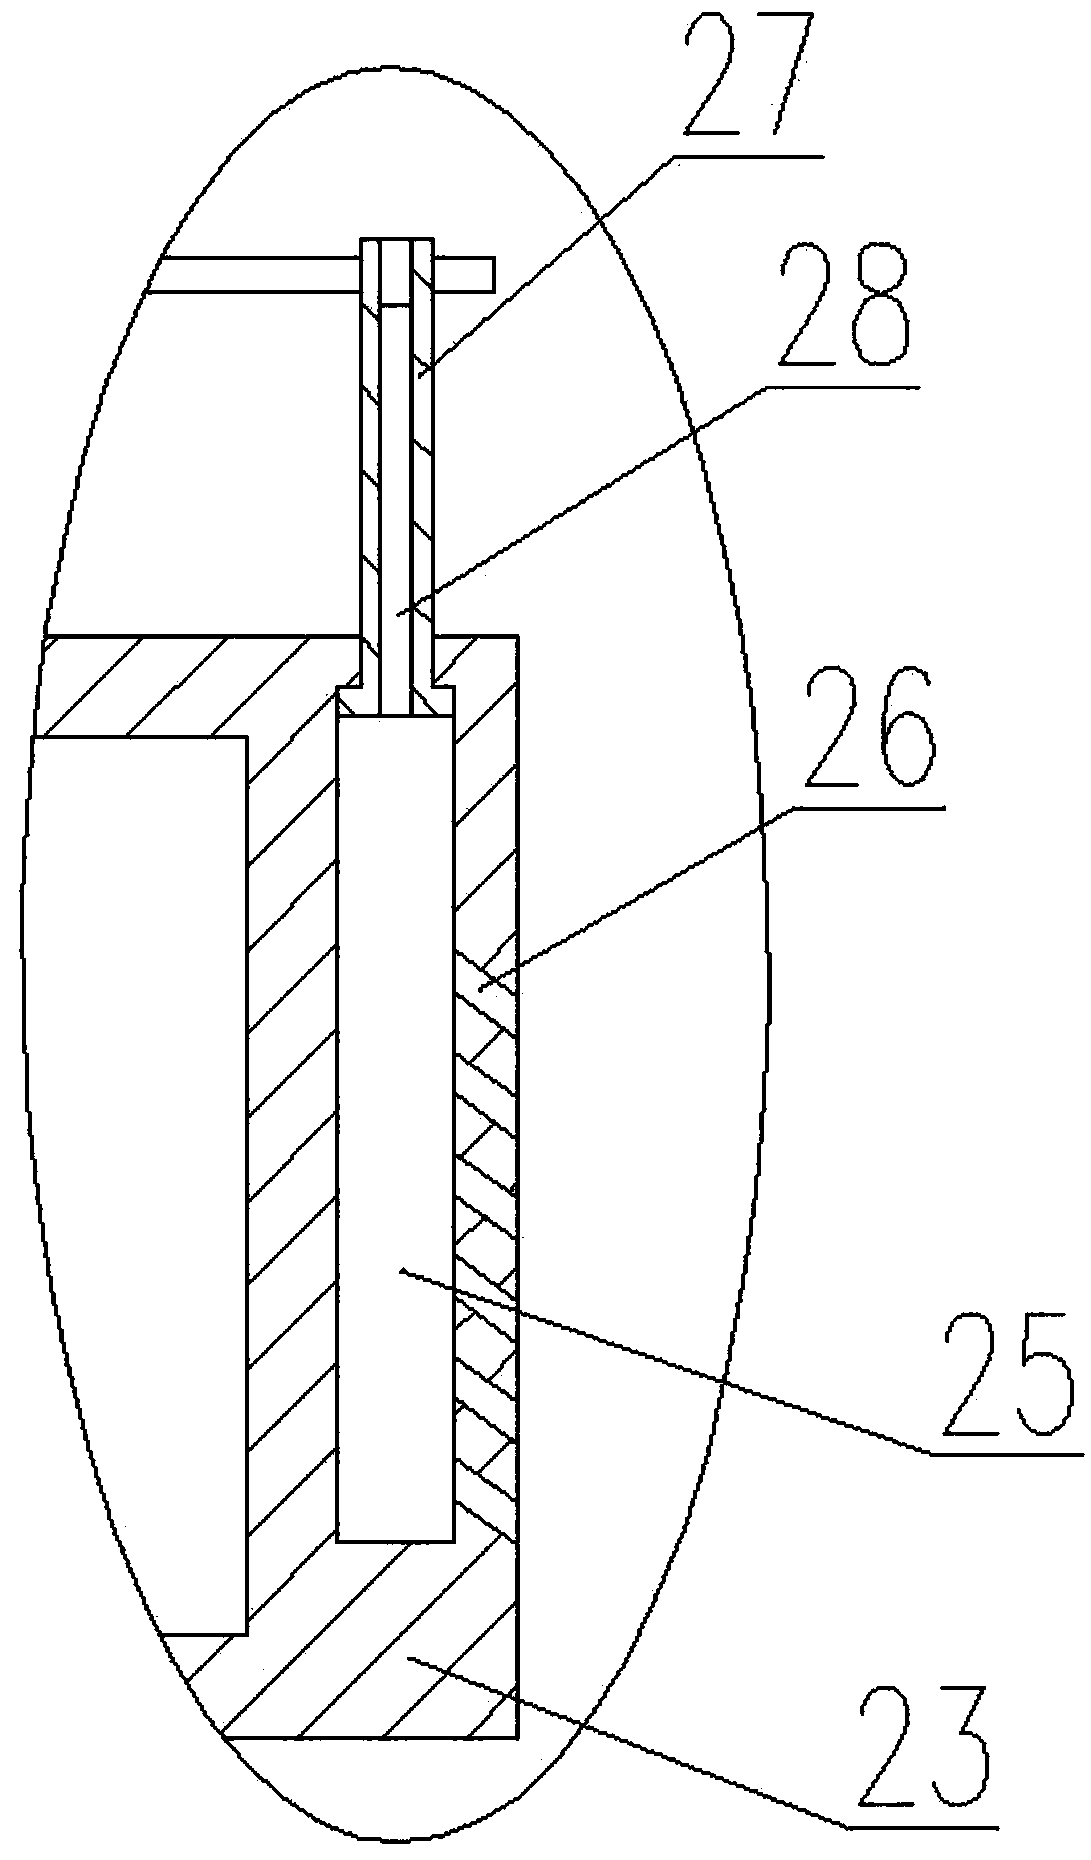 Carton automatic forming device